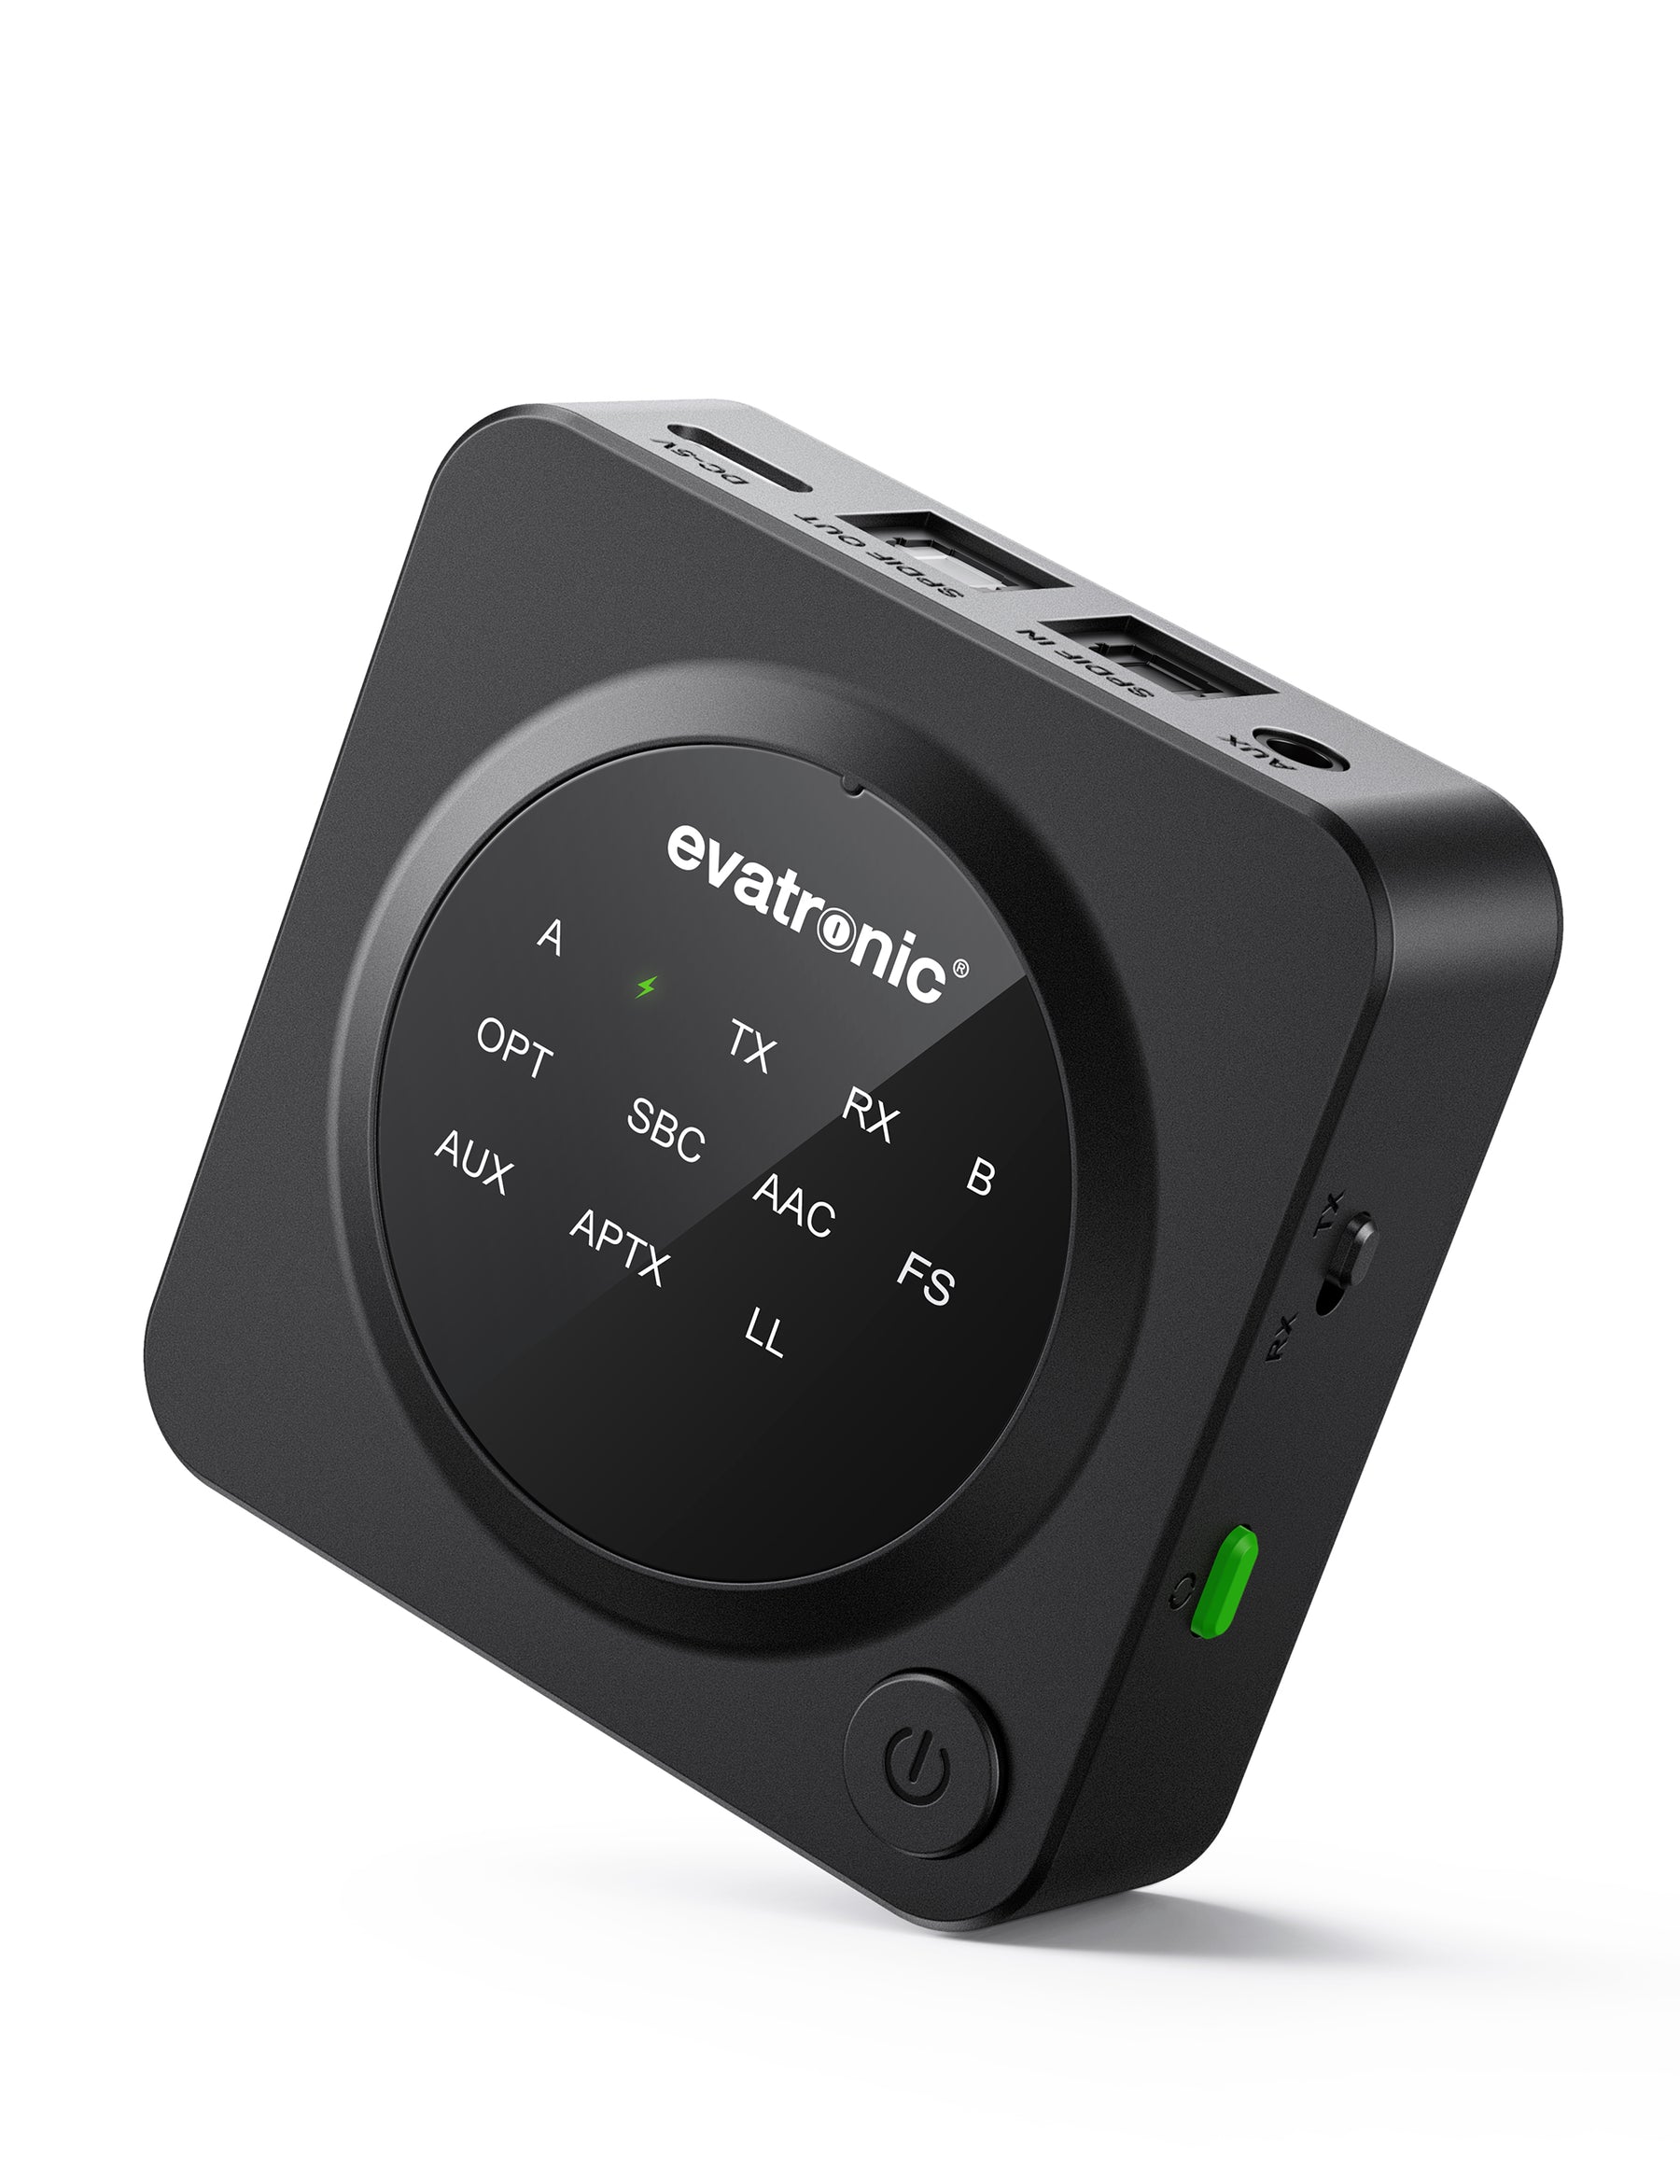 Connect Hub Bluetooth Audio Transmitter and Receiver for TV (USED